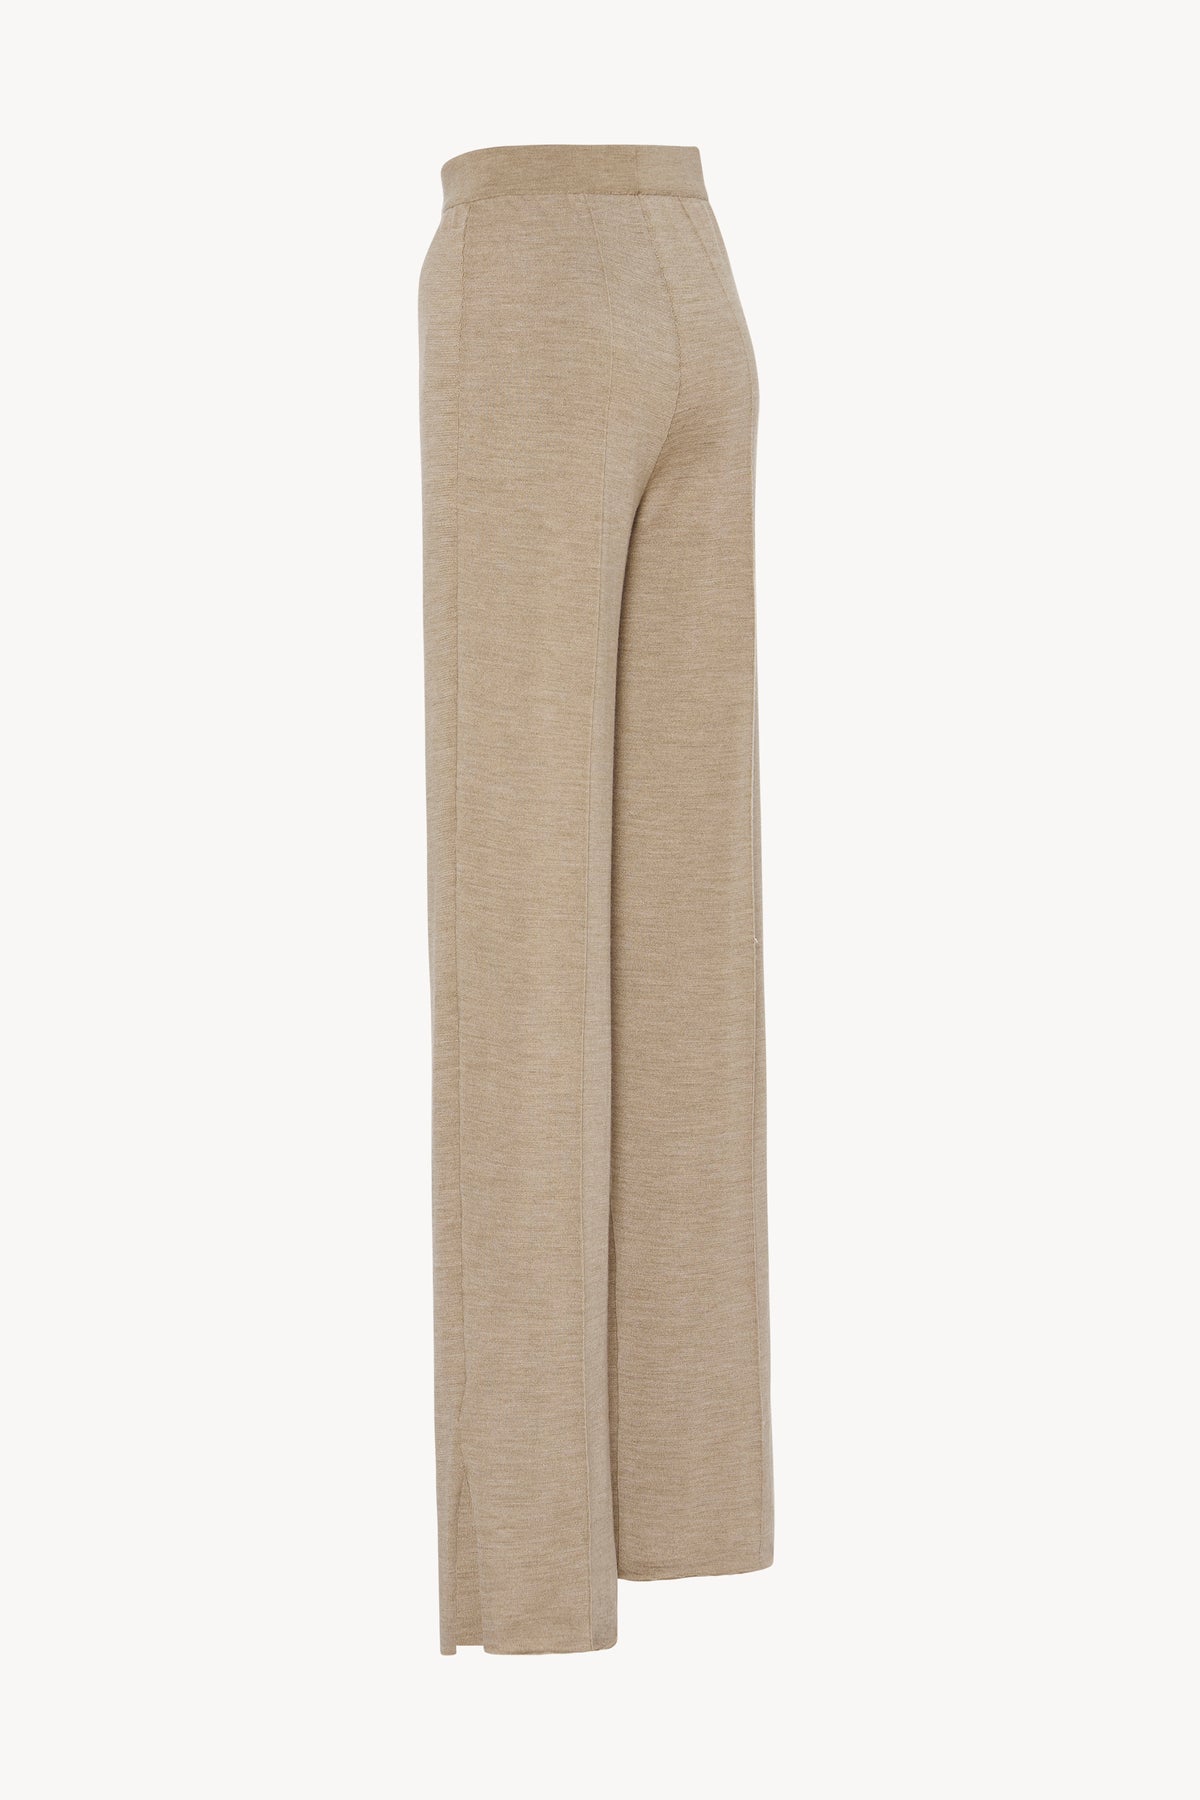 Egle Pant in Wool, Silk and Cashmere